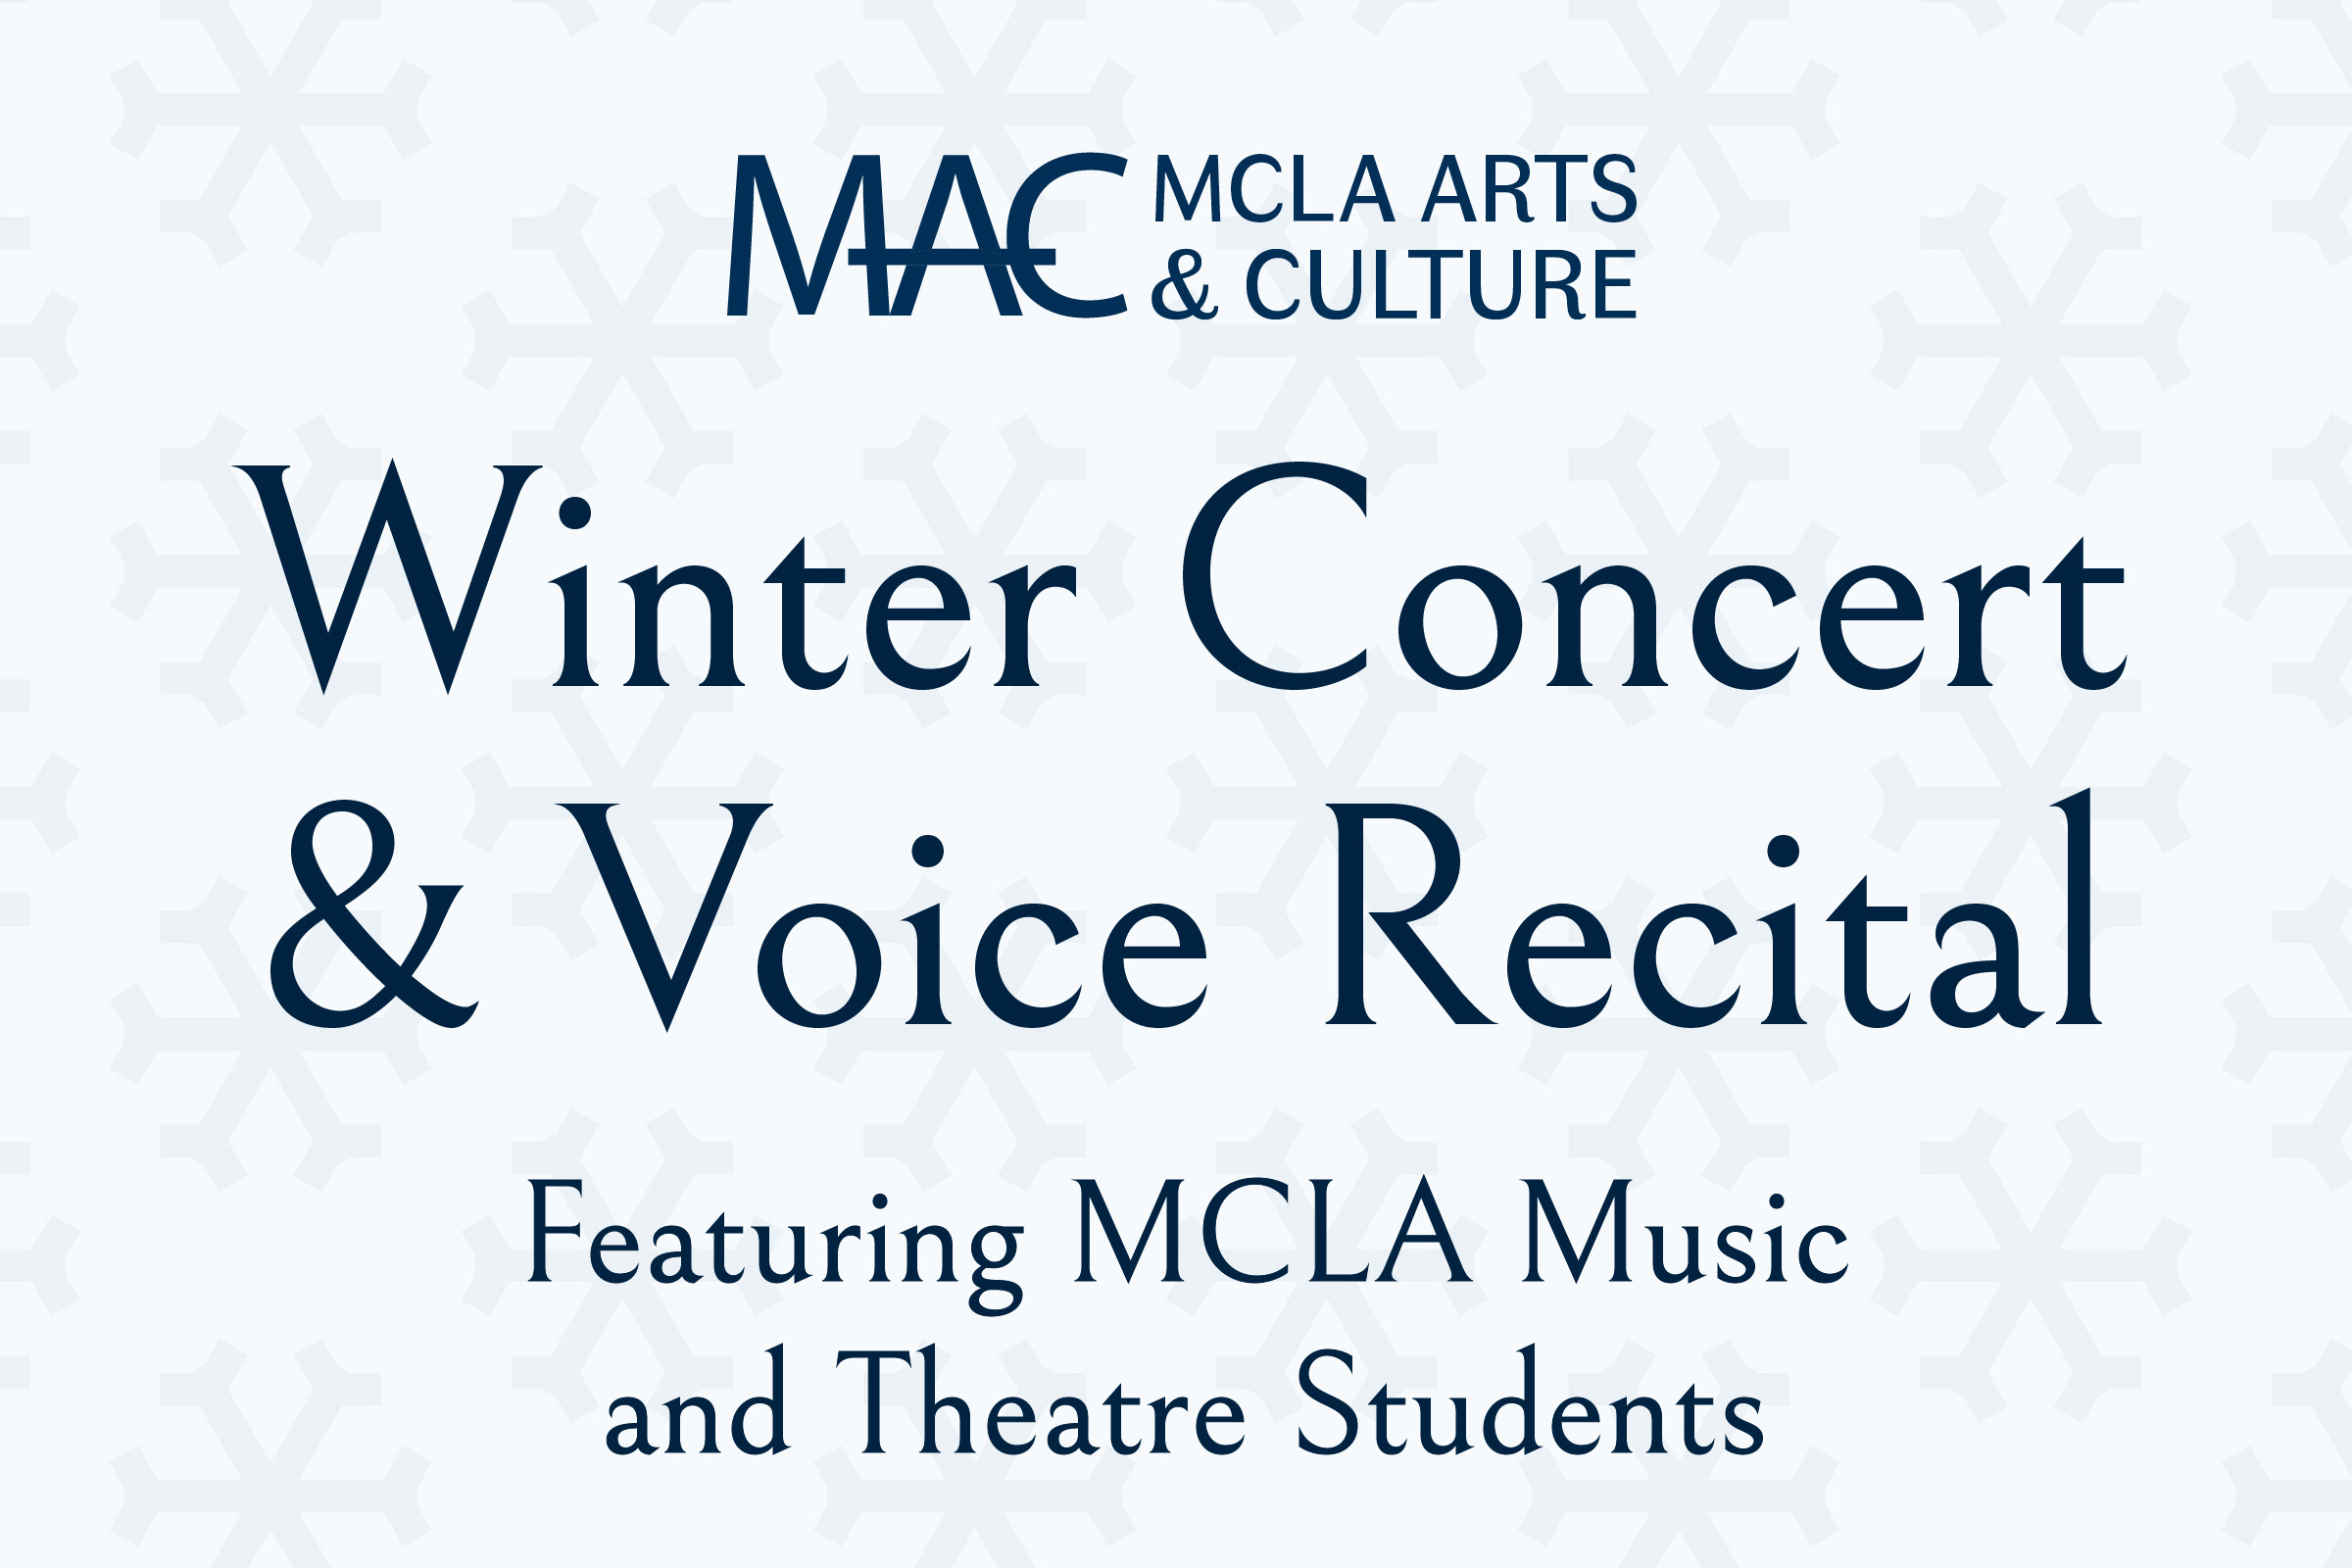 Graphic with the text "Winter Concert & Voice Recital / Featuring MCLA Music and Theatre Students"